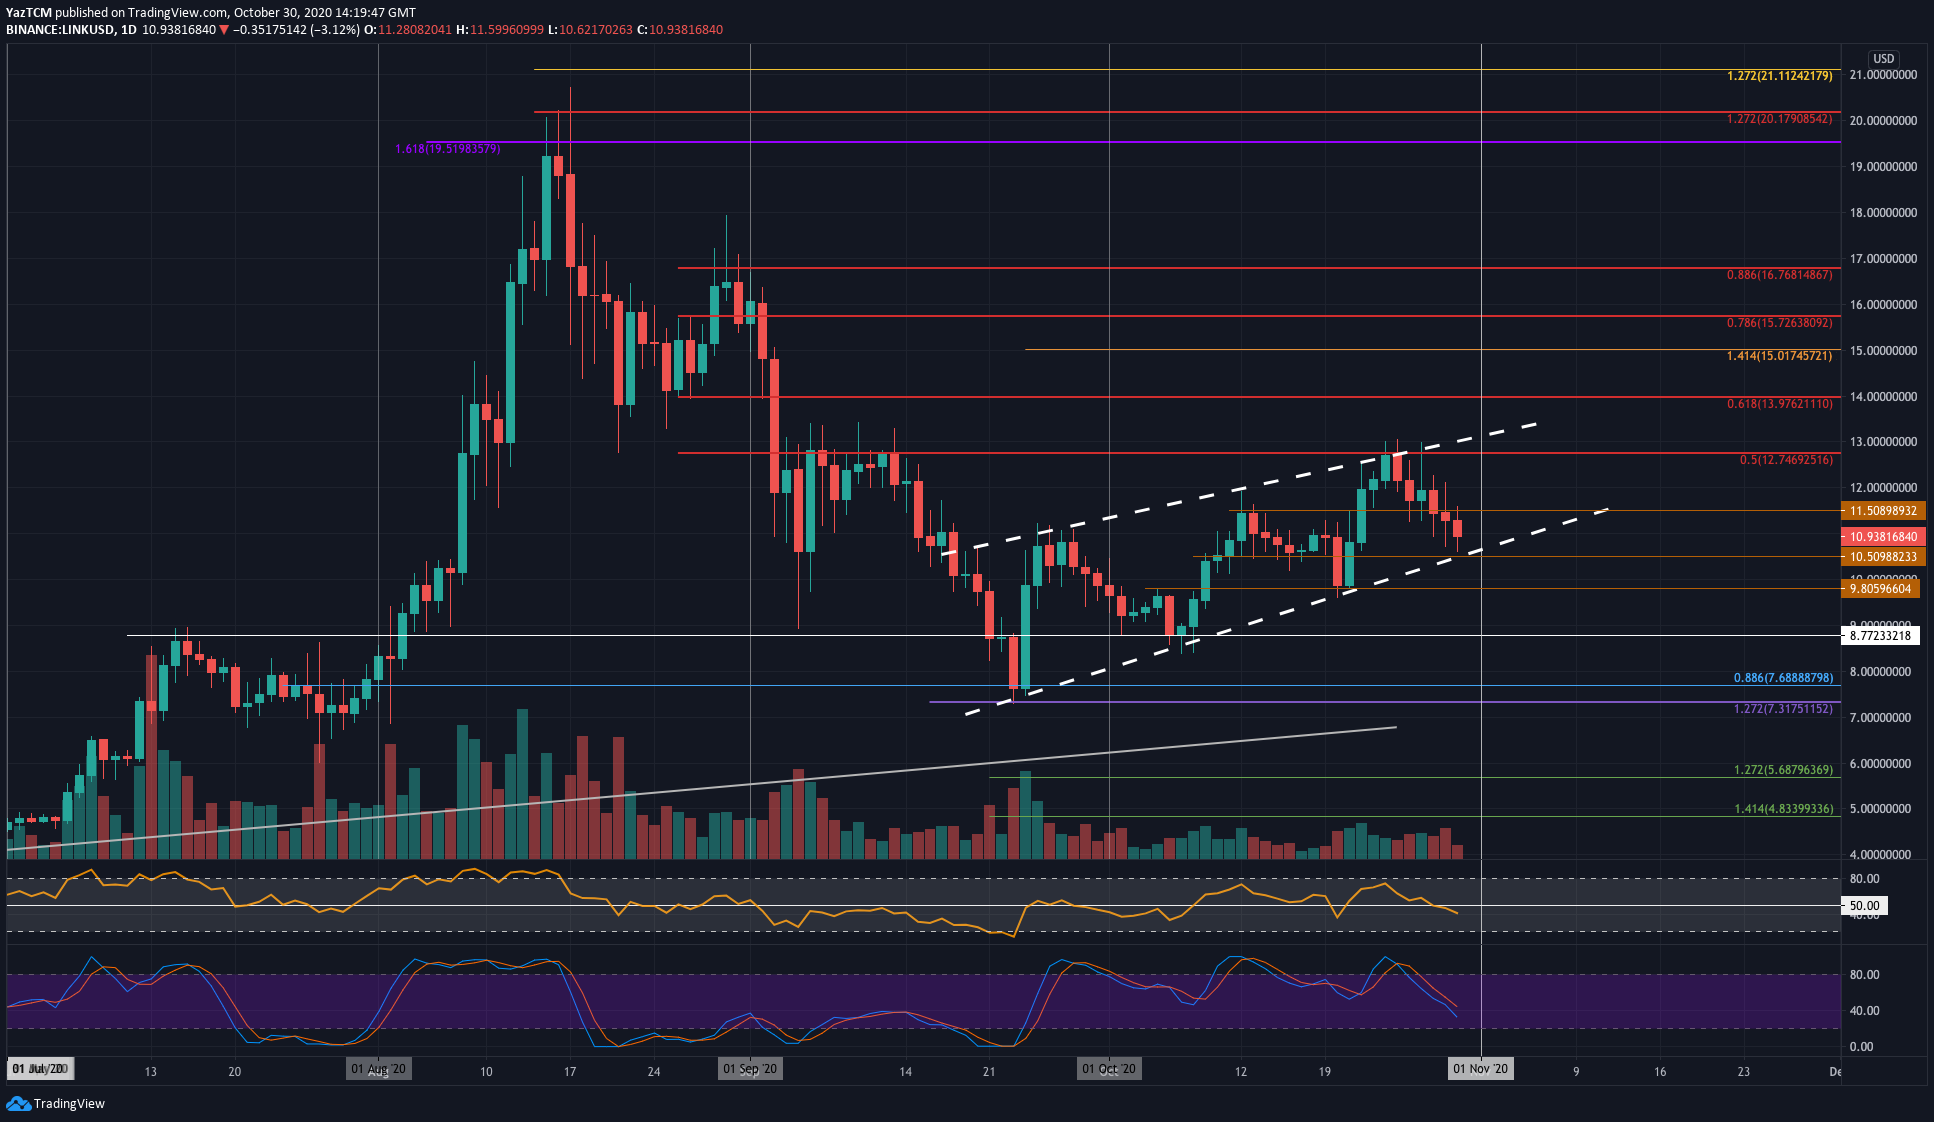 Crypto Price Analysis & Overview October 30th: Bitcoin, Ethereum, Ripple, Chainlink, and Binance Coin